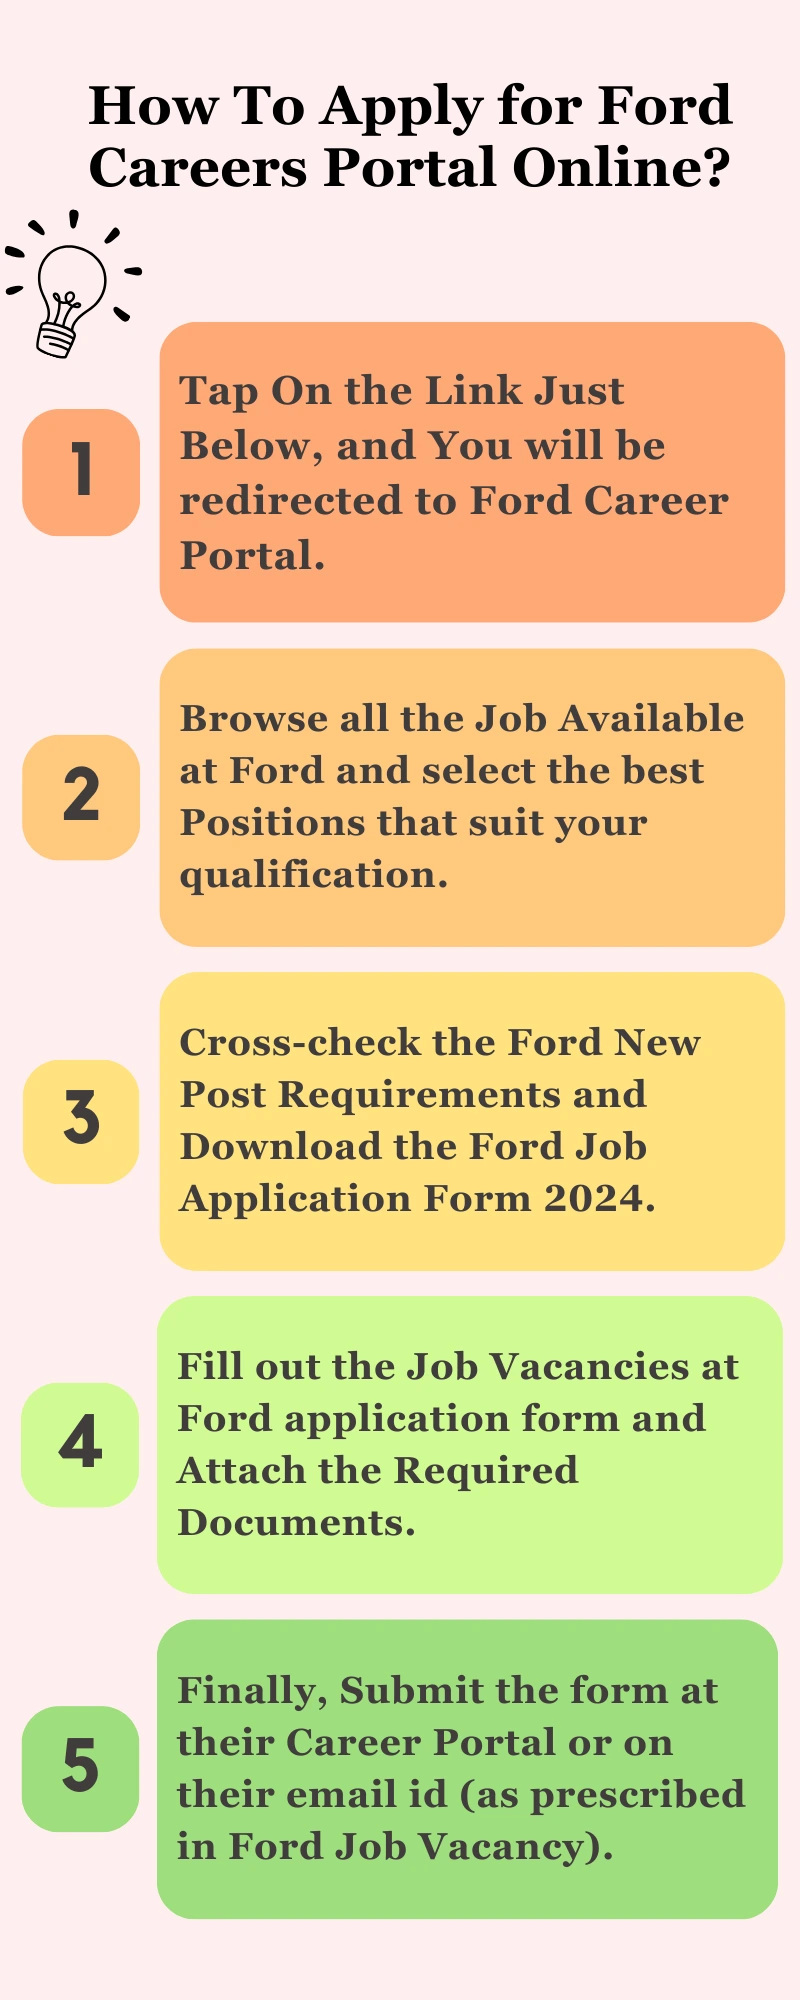 How To Apply for Ford Careers Portal Online?